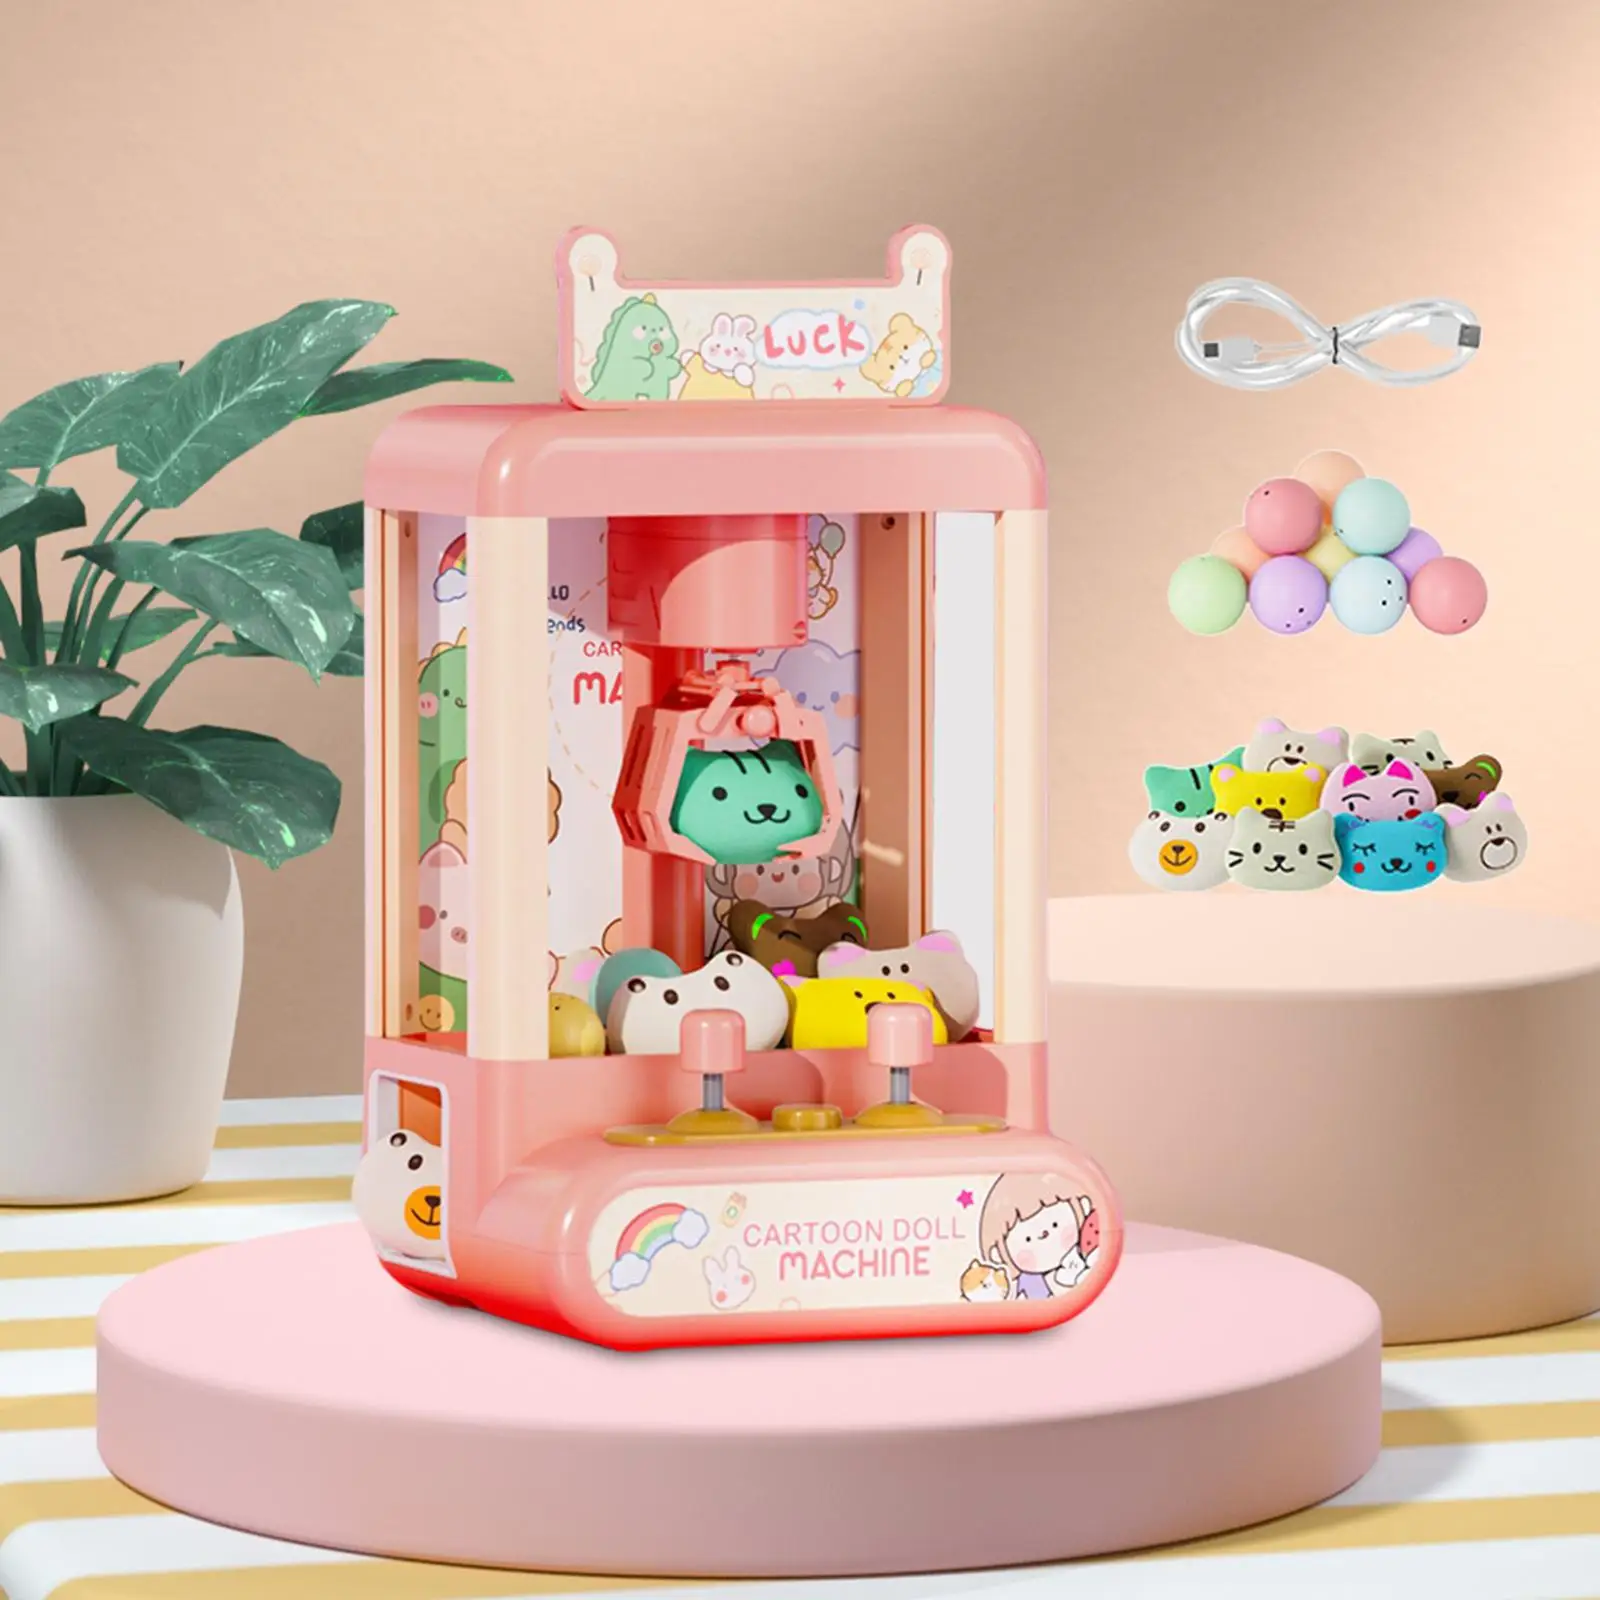 Claw Machine for Kids Electronic Claw Game Machine Grabber Prize Dispenser Toys for Kids Girls Boys Children Birthday Gift Party